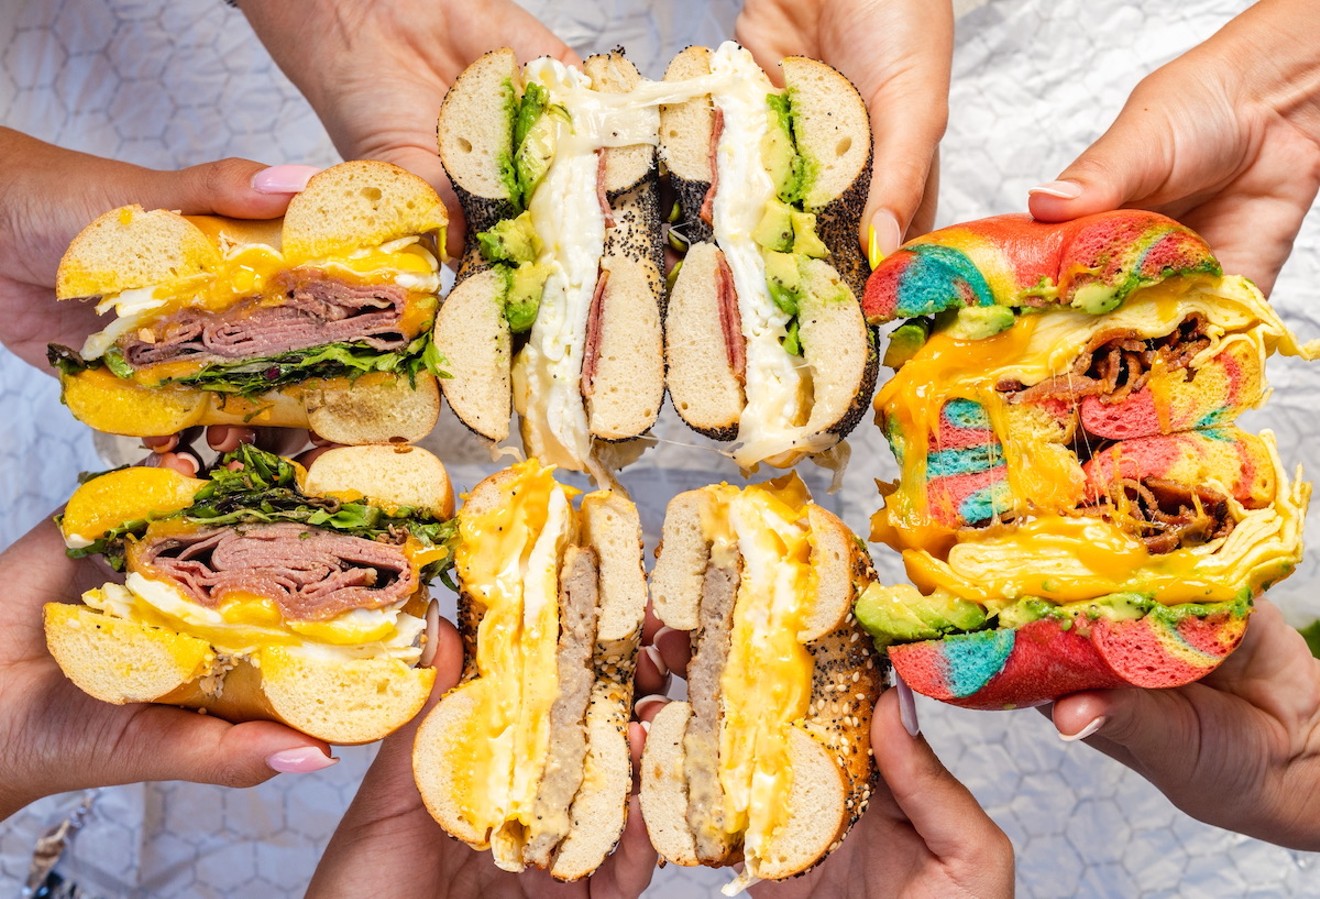 Bagels are always a colorful experience at Mitch's Bagels.